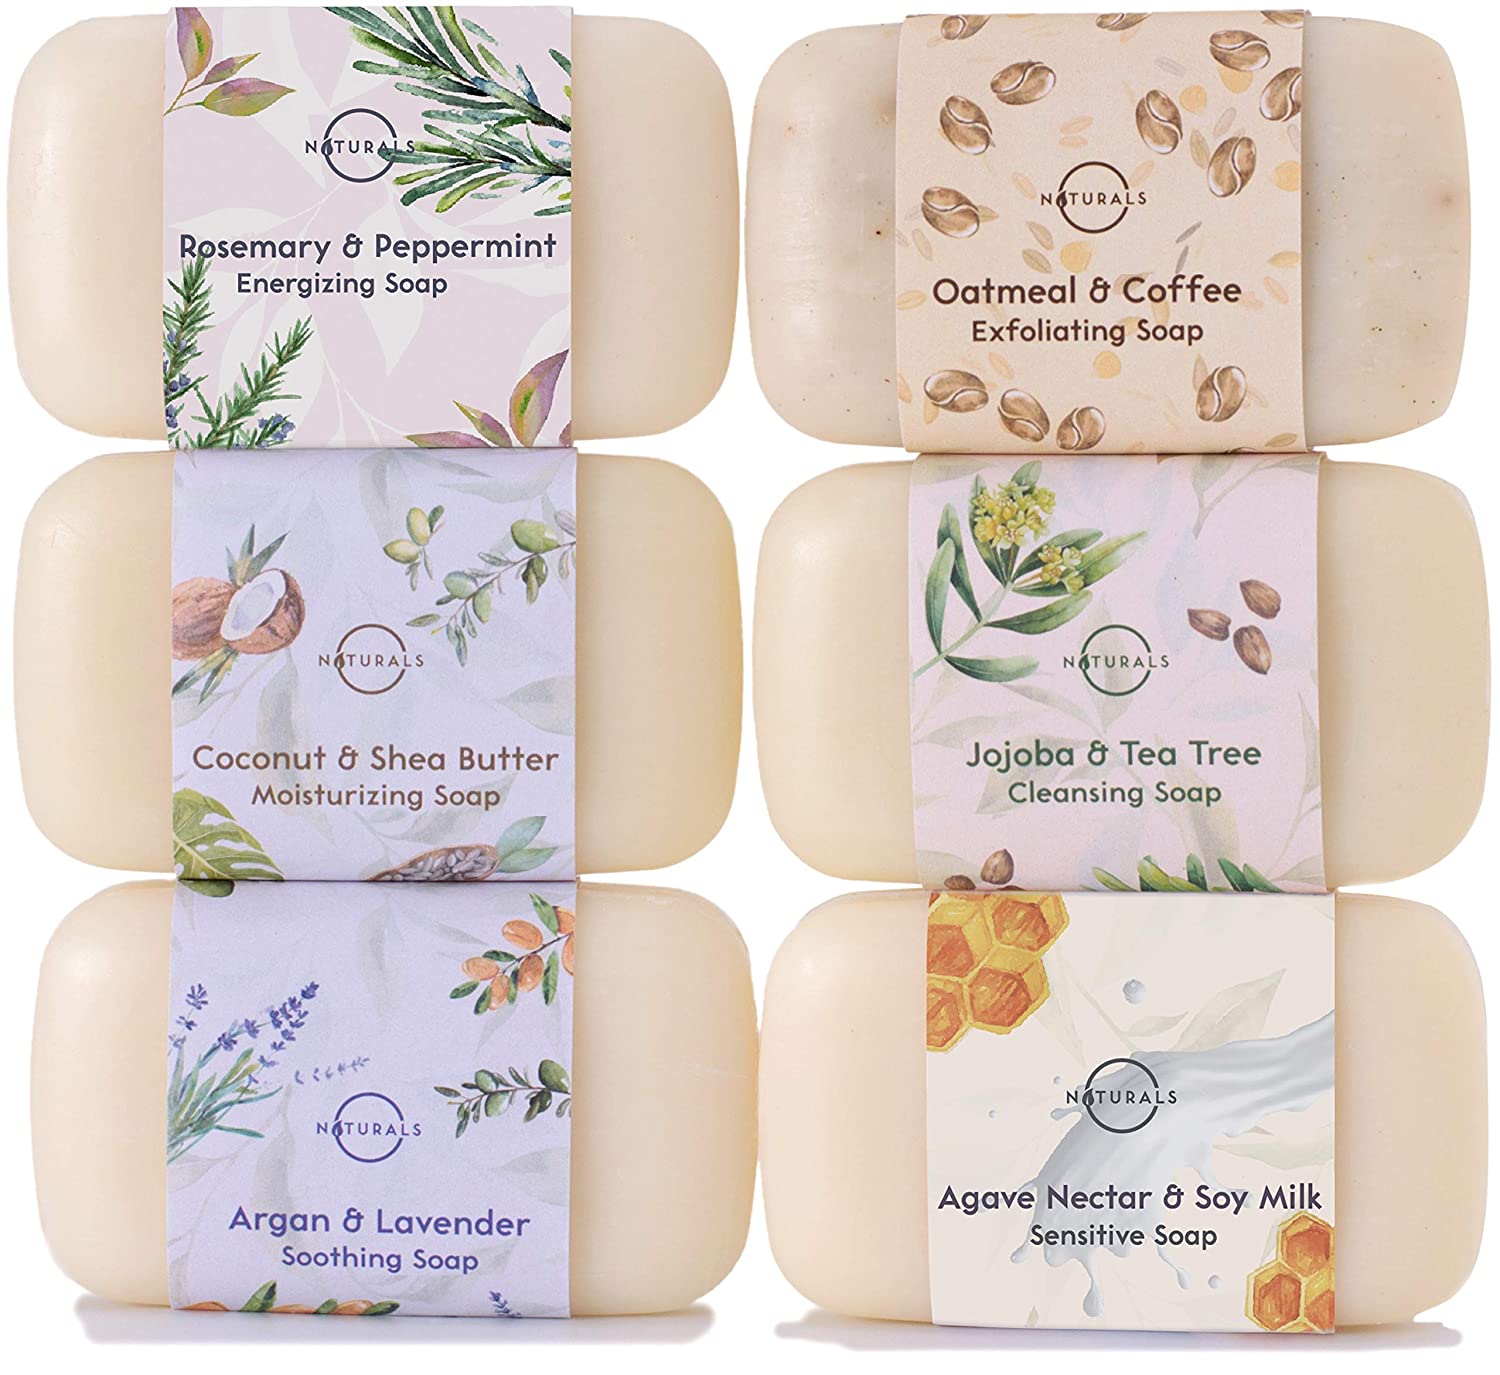 O Naturals 6 Piece Moisturizing Body Wash Bar Soap Collection. Hand Soap, Acne Soap 100% Natural Organic Ingredients & Therapeutic Essential Oils. Vegan